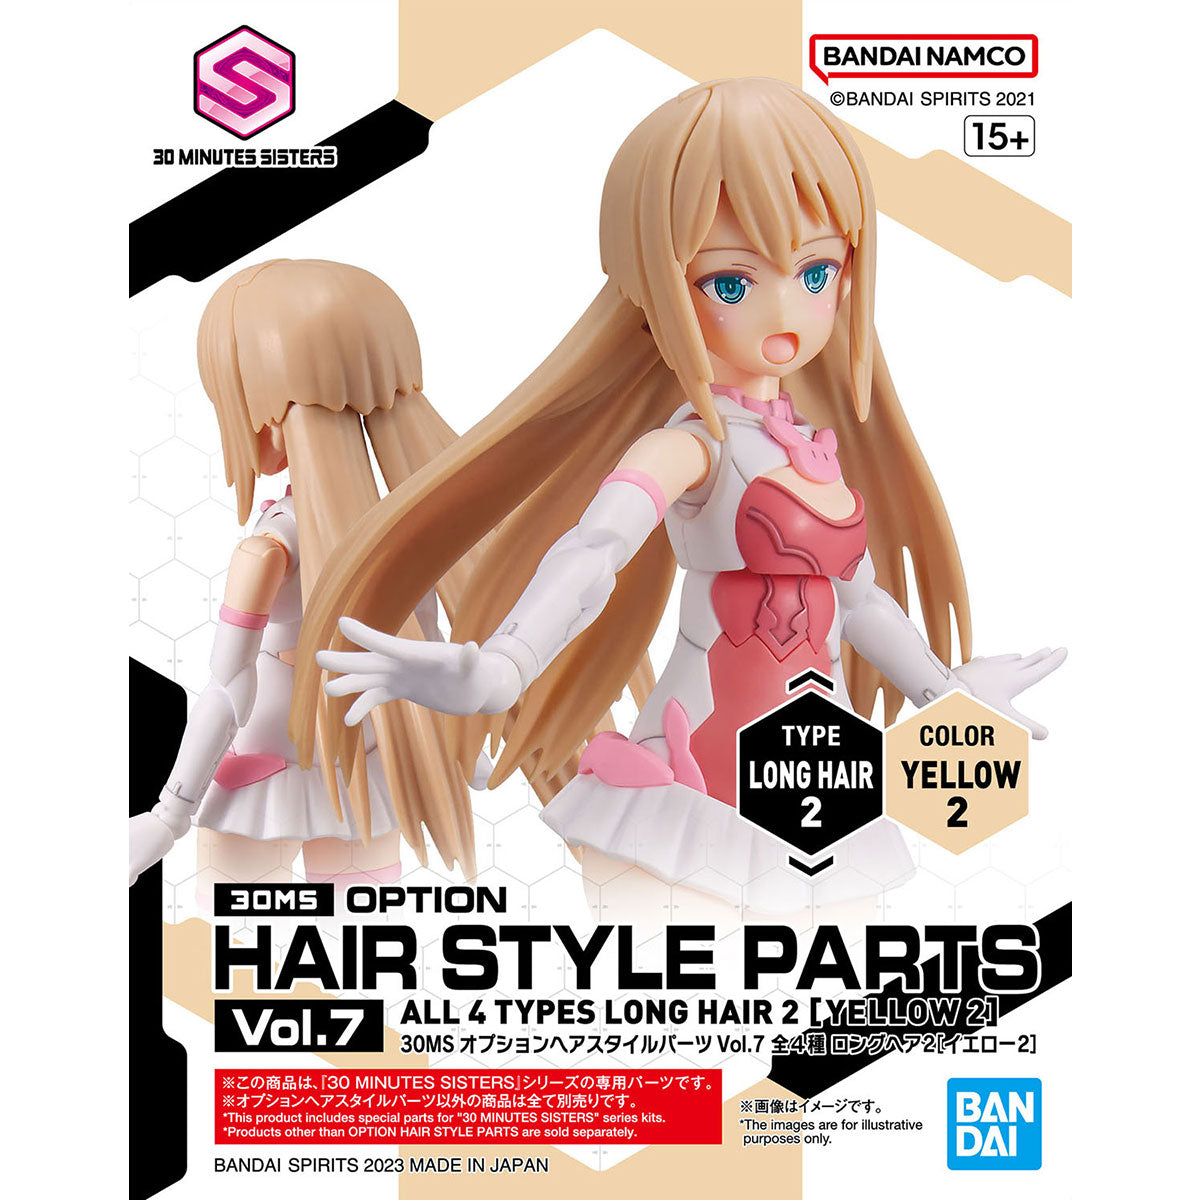 30MS Option Hairstyle Parts Vol.7 All 4 Types Long Hair 2